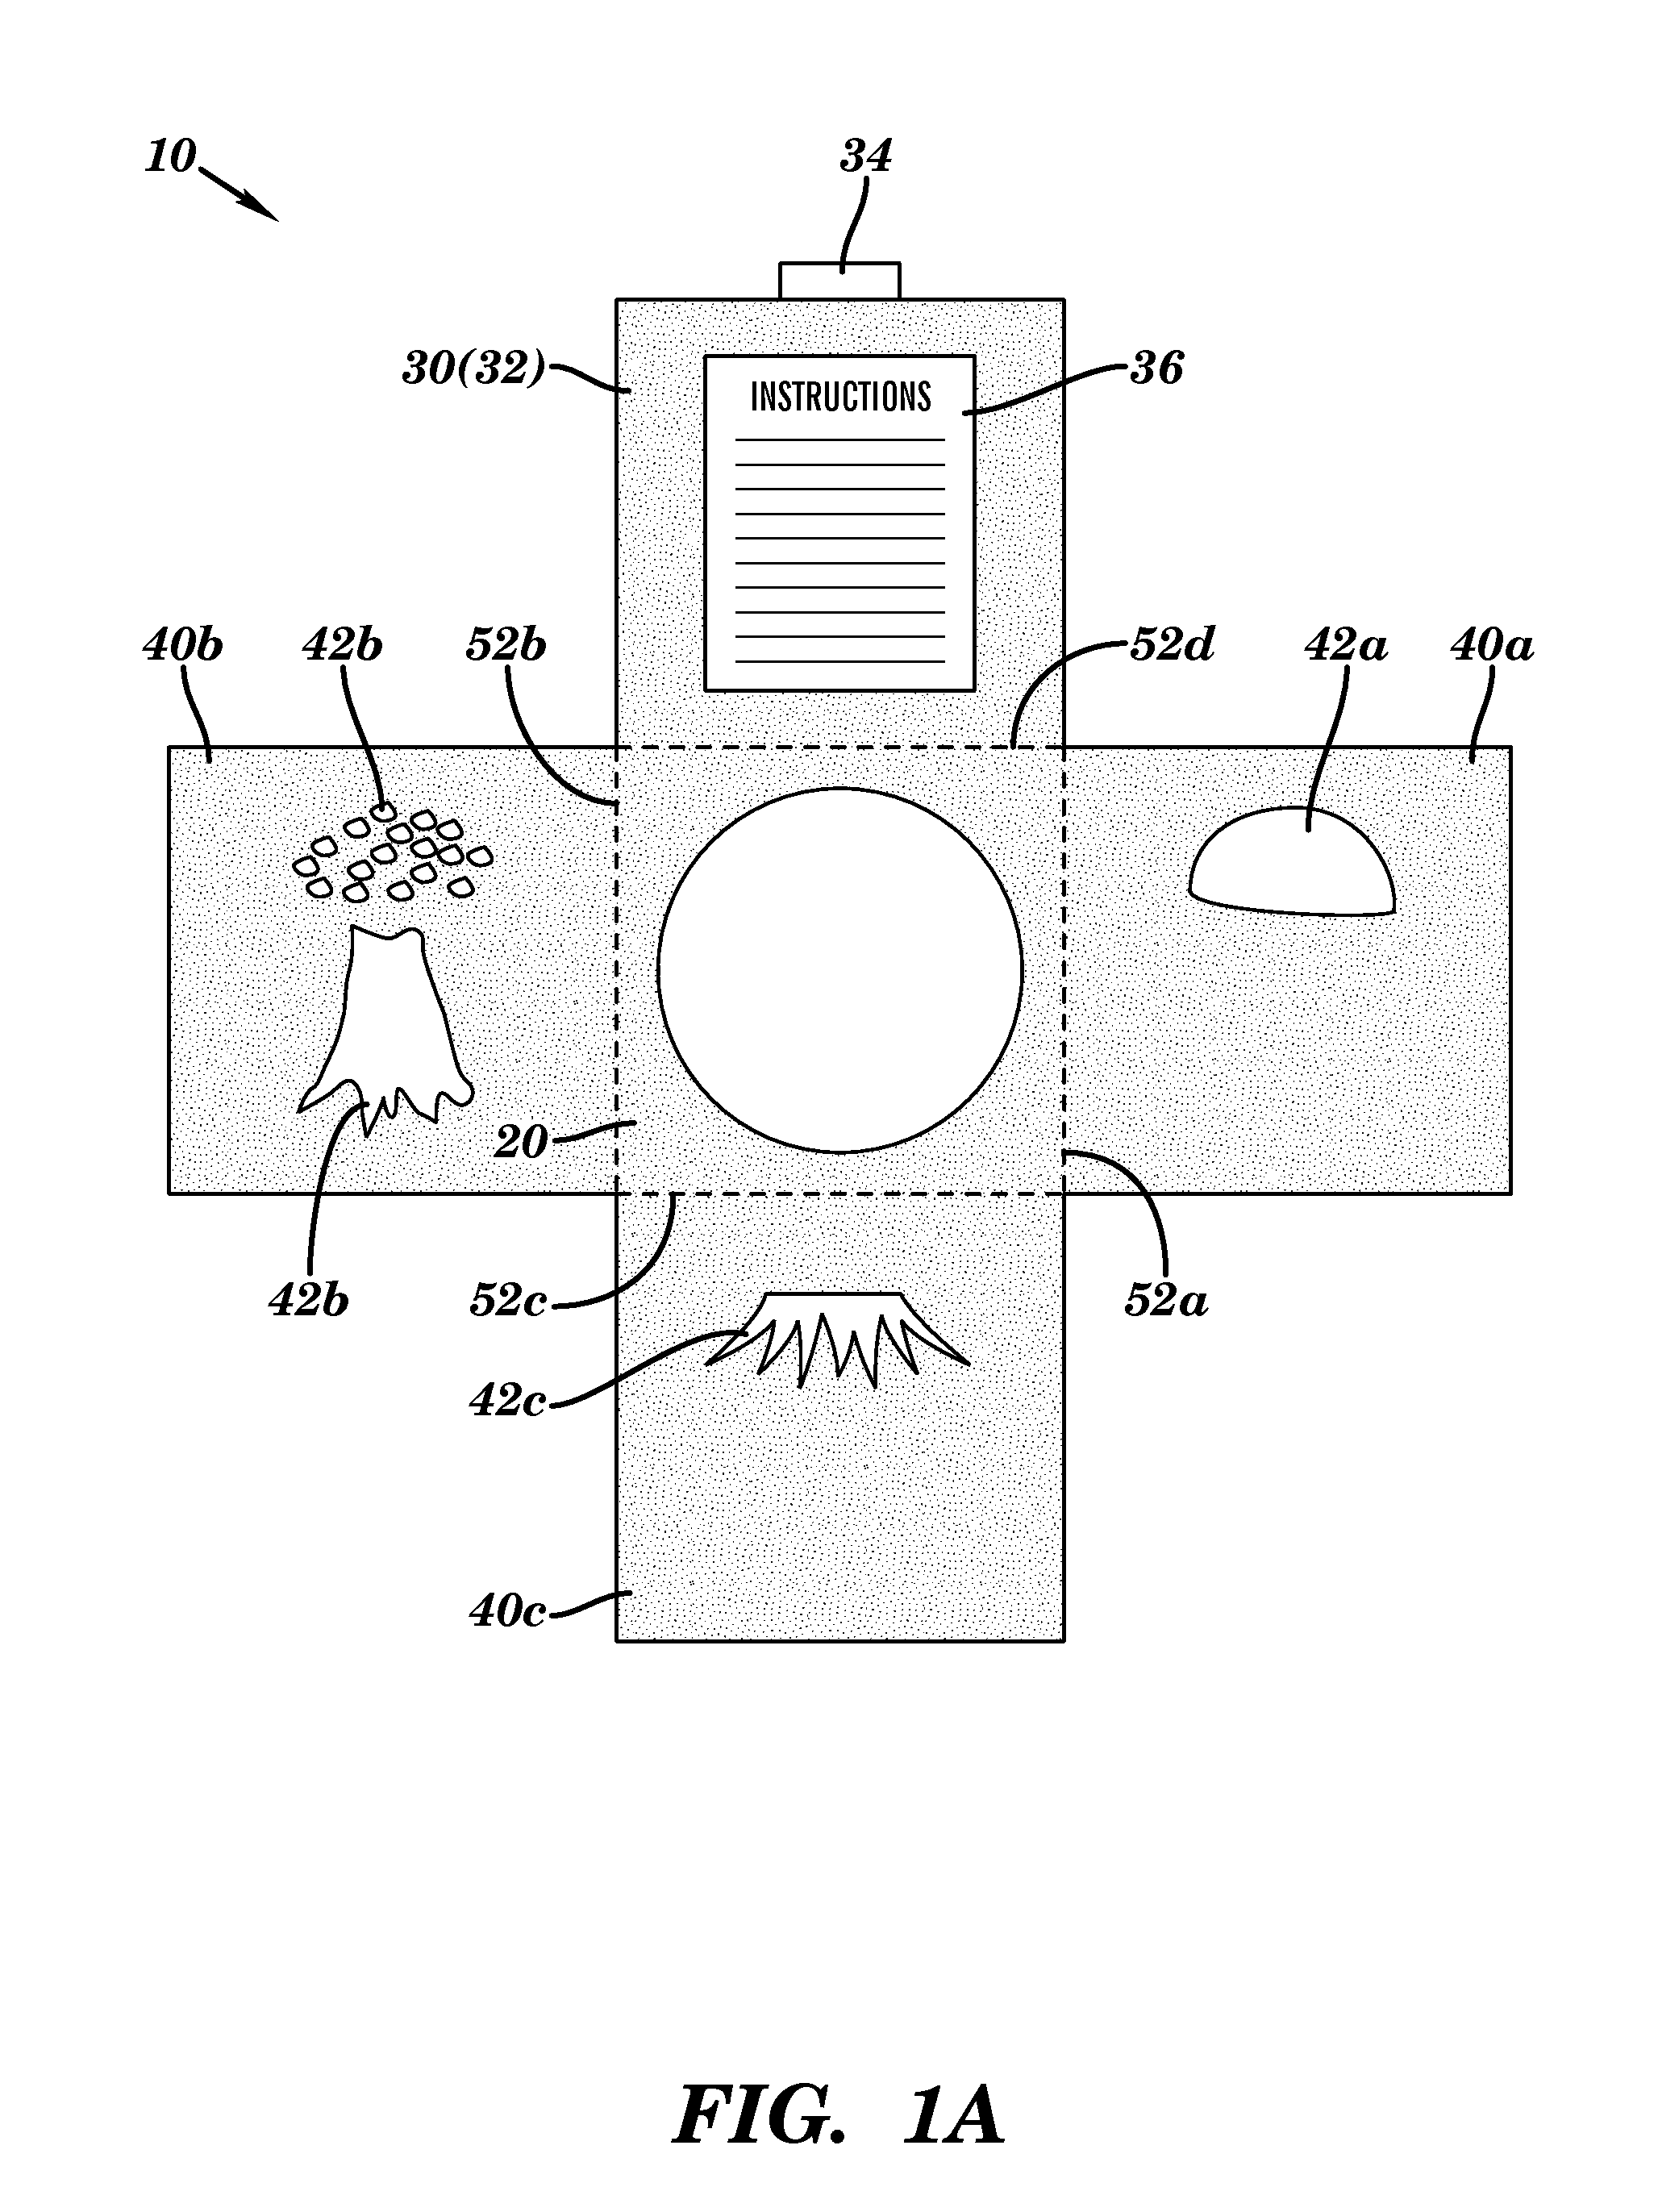 Self-aligning stencil device and method of producing a multi-color composite image